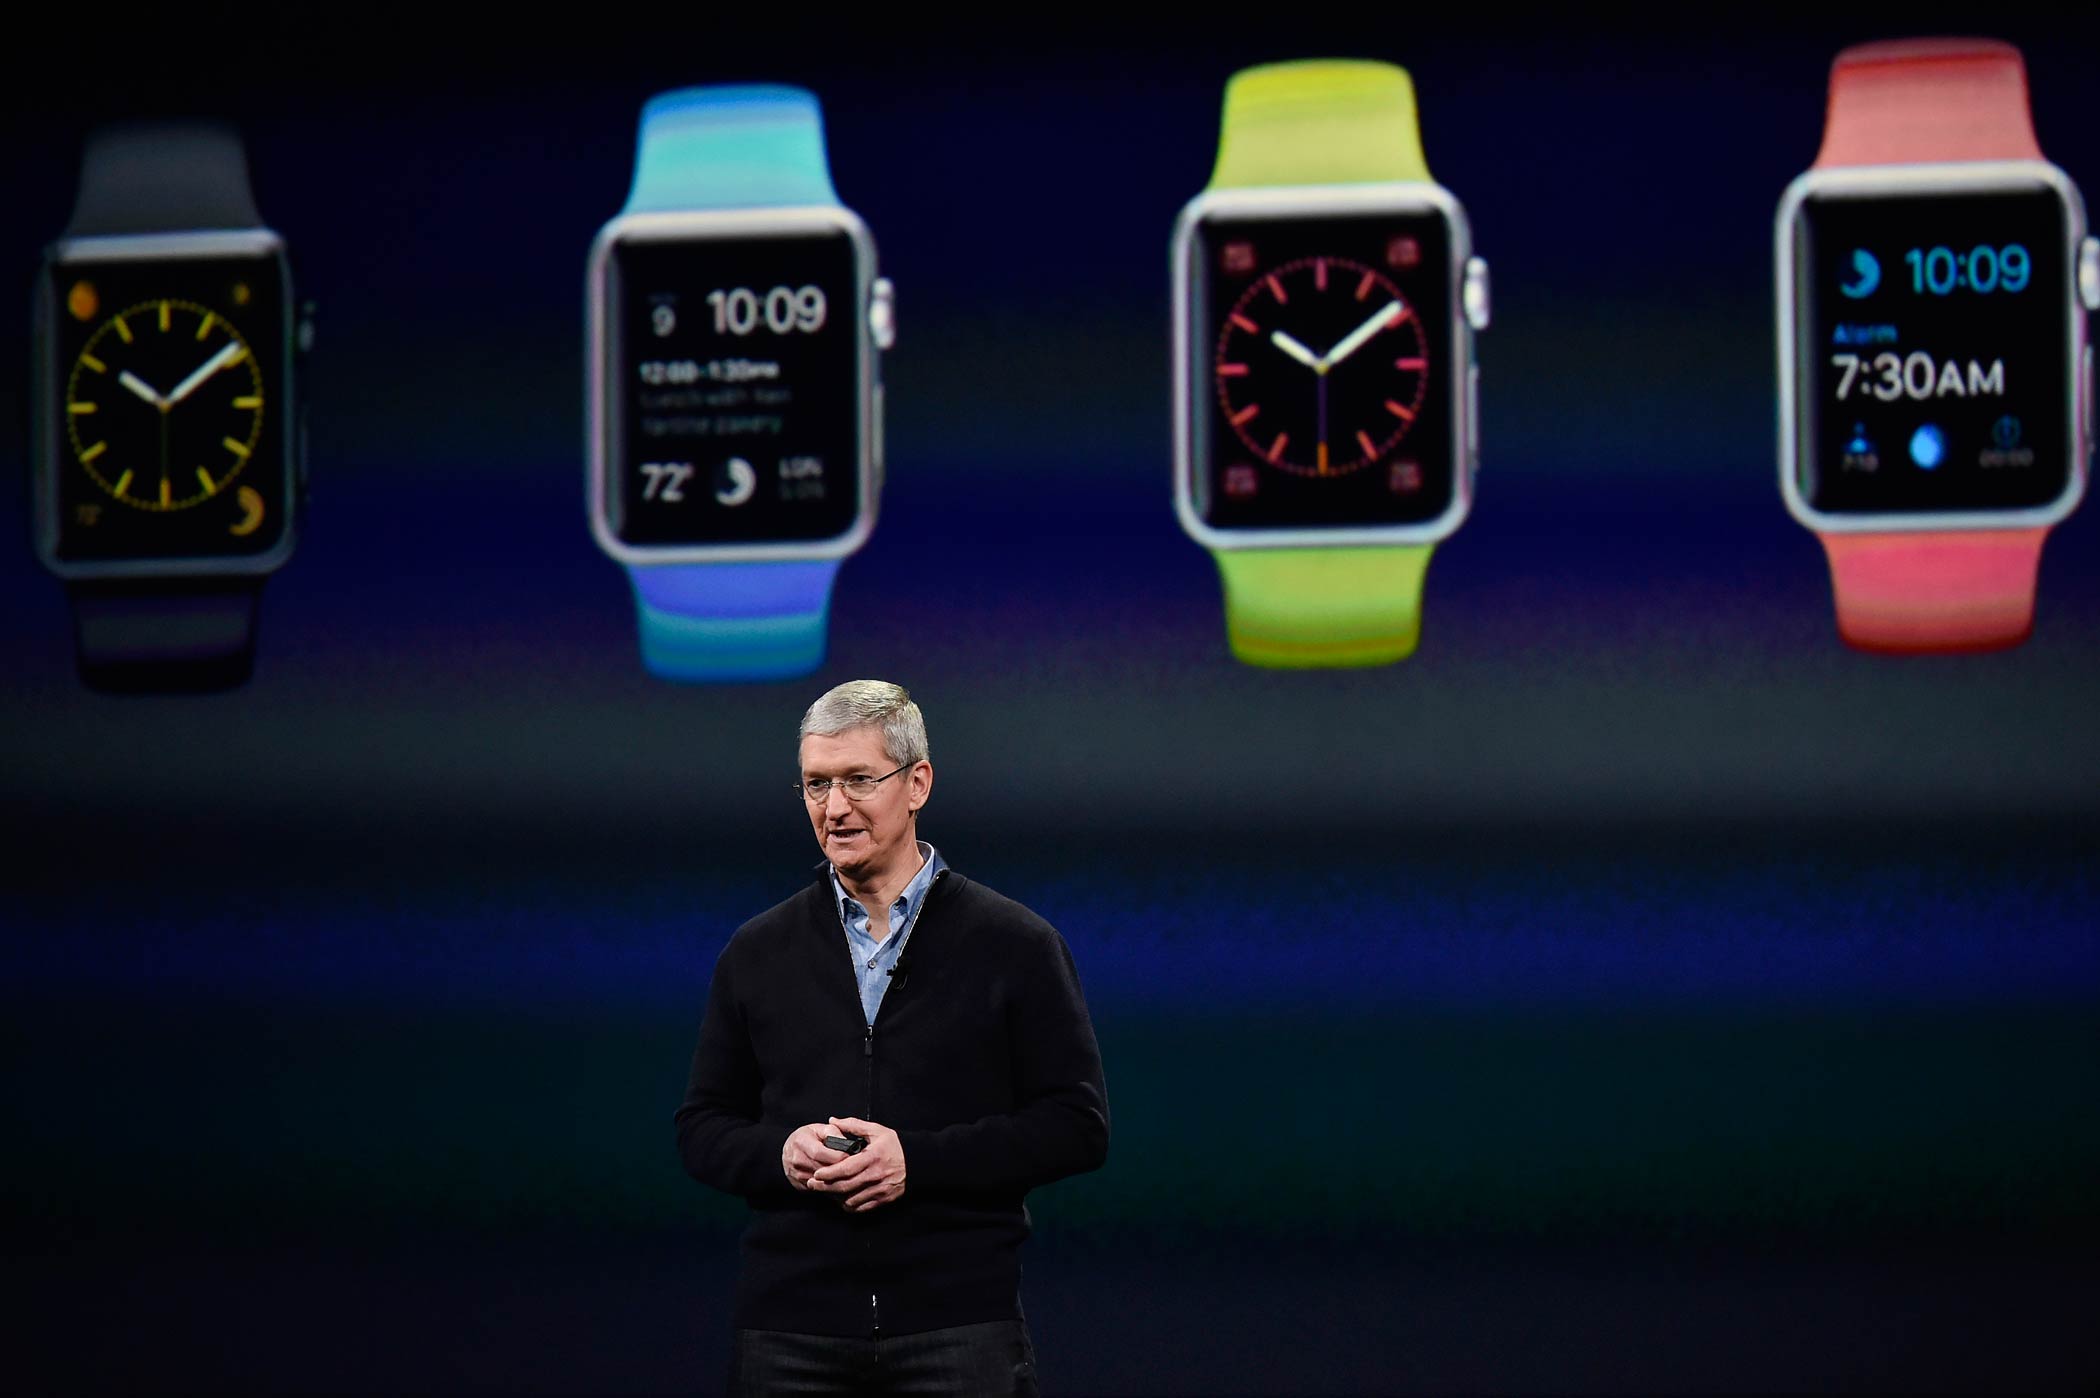 Tim Cook, CEO of Apple, speaks during the Apple Inc. Spring Forward event in San Francisco, Calif. on March 9, 2015. (David Paul Morris—Bloomberg/Getty Images)